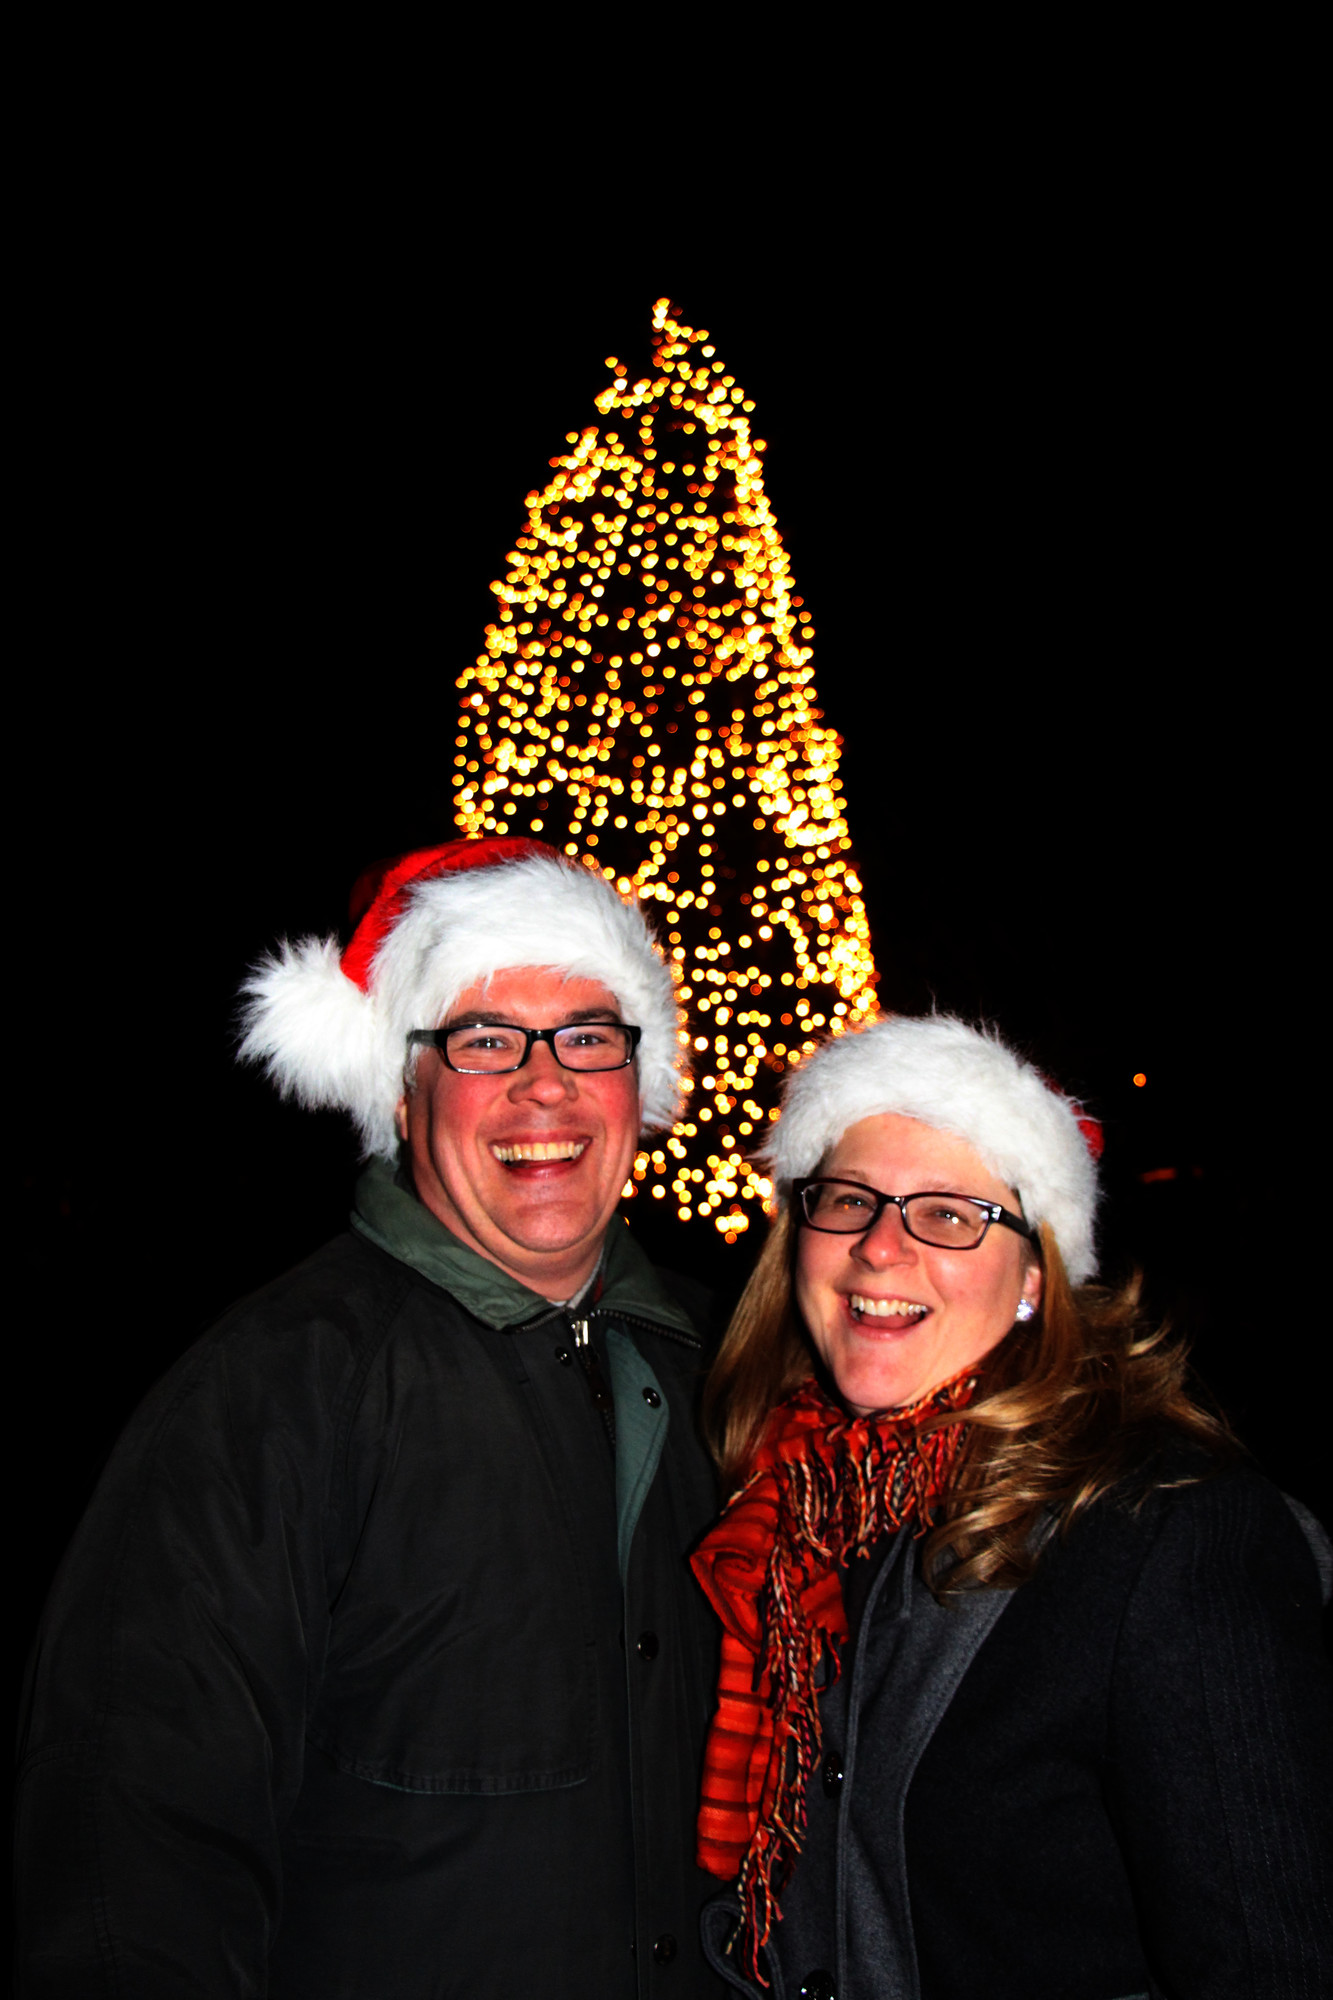 Jon Cerabore with his wife, Jeannie, were in the holiday spirit.